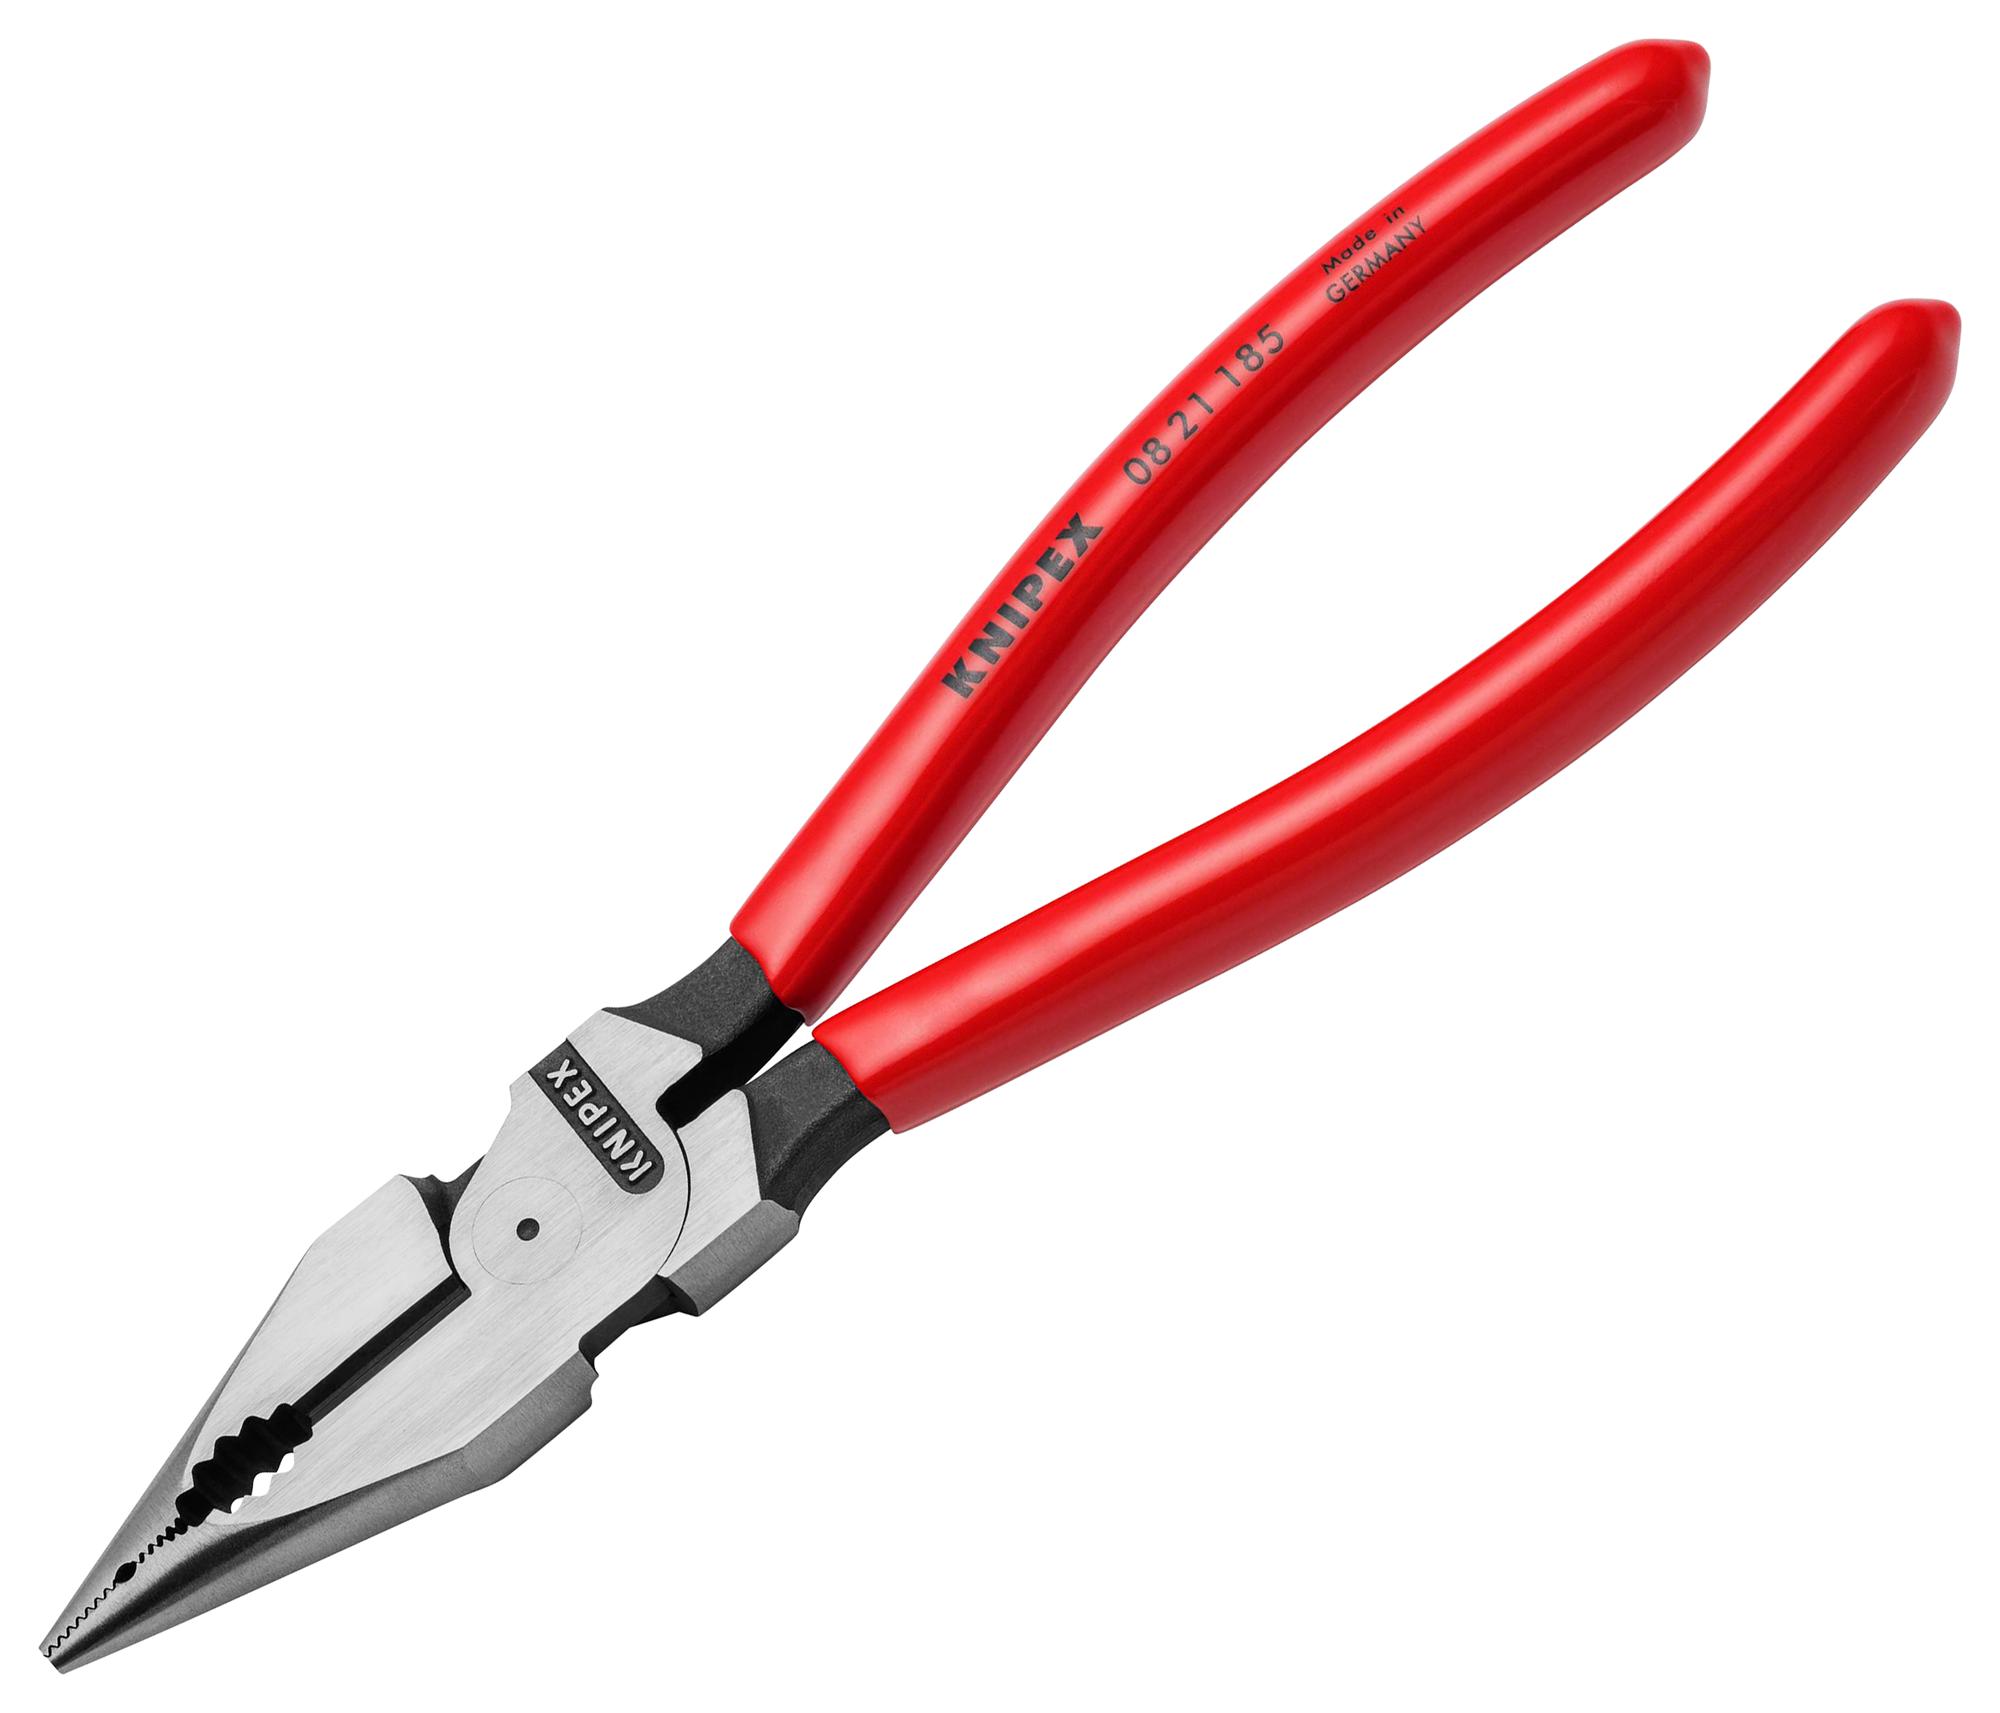 Knipex 08 25 185 Sb Combination Plier, Needle Nose, 185mm